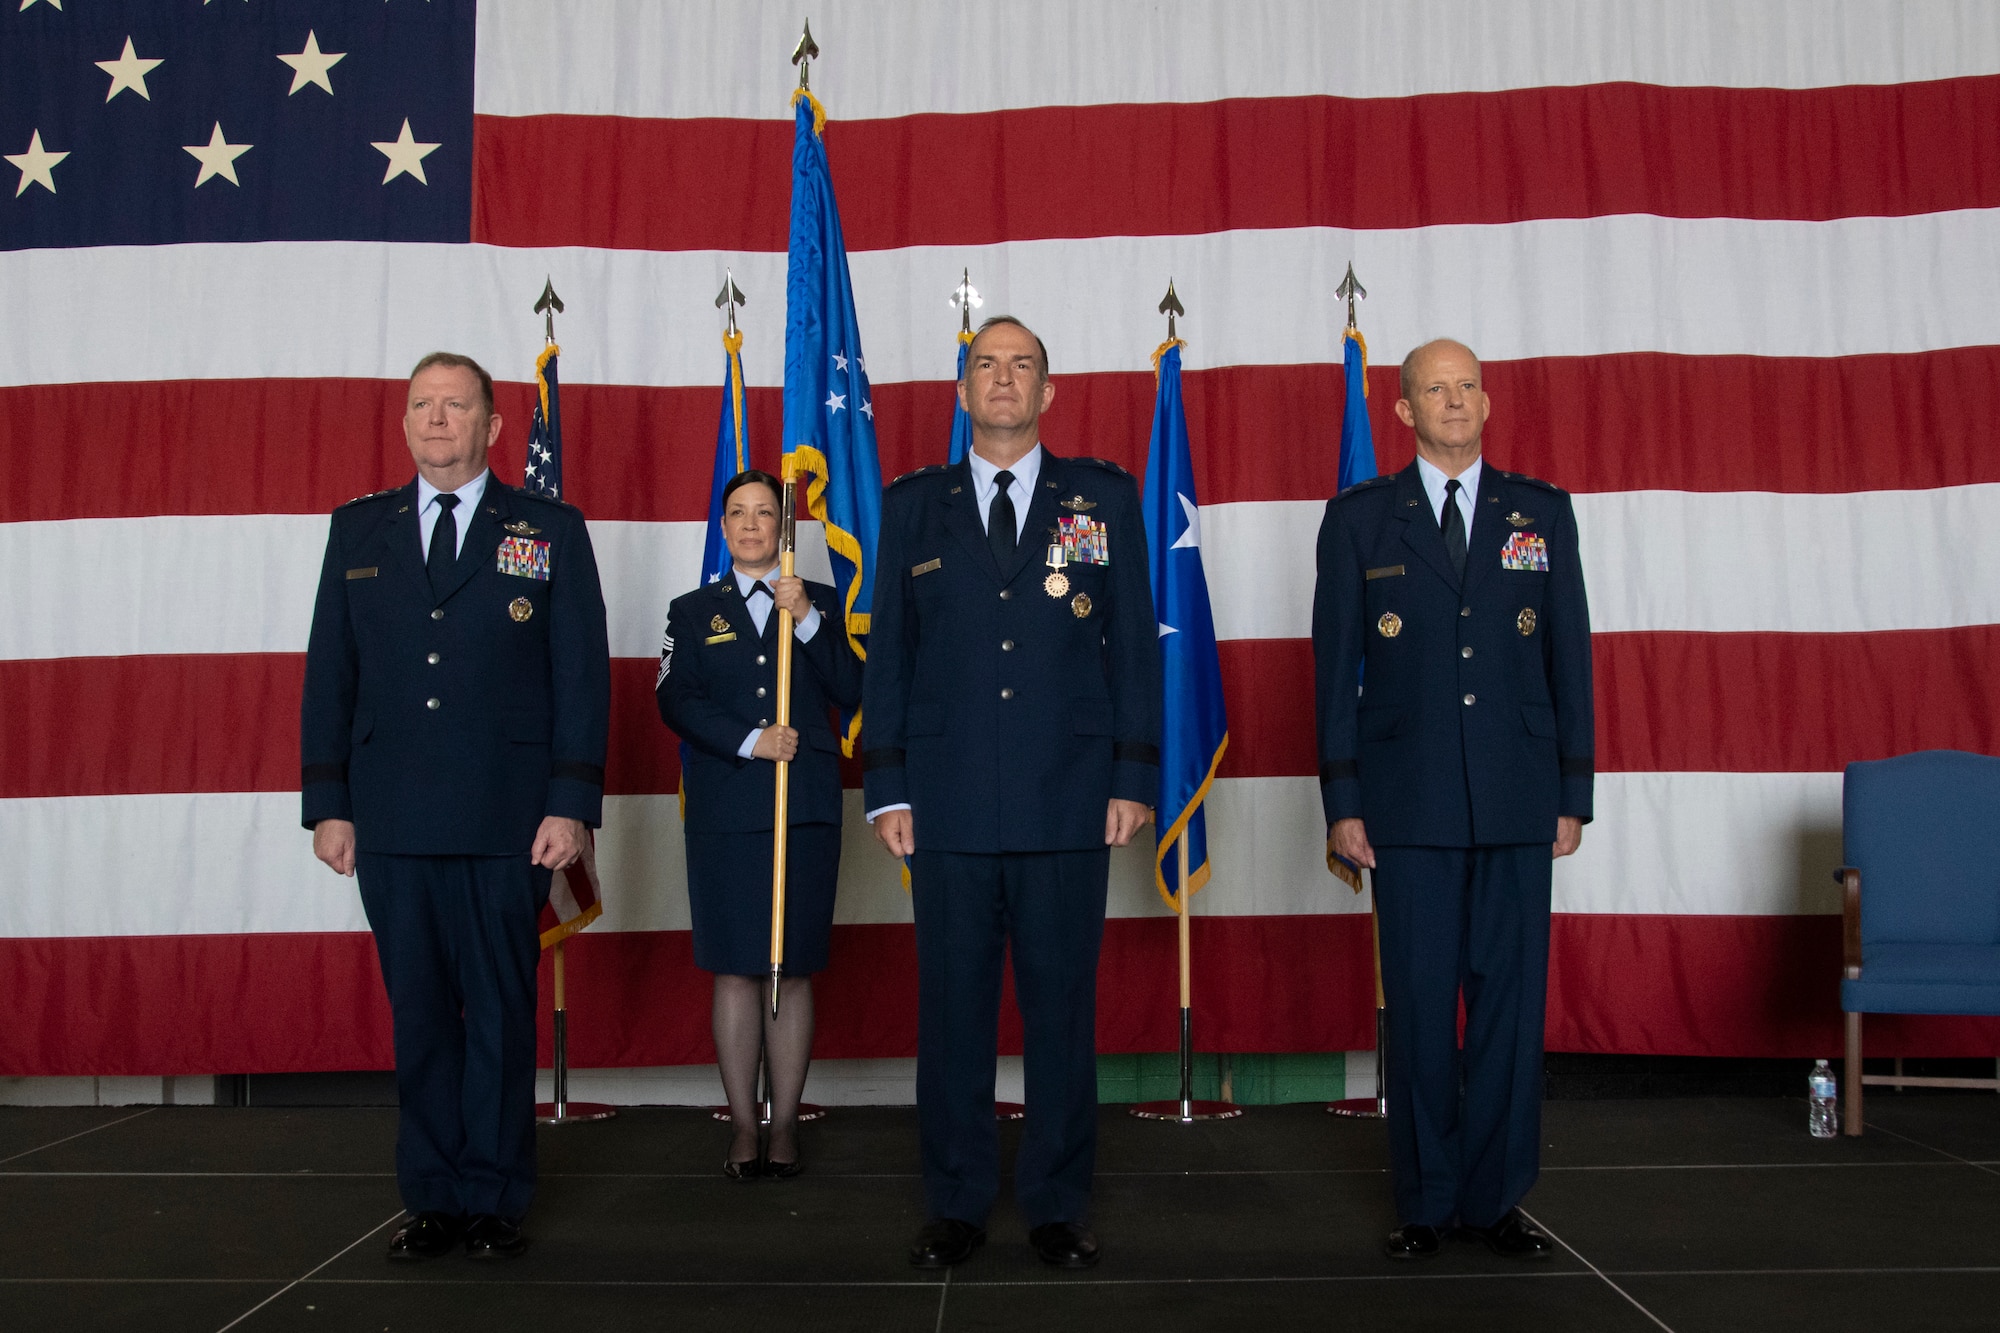 Maj. Gen. Bret C. Larson (right) takes command of 22nd Air Force from Maj. Gen. John P. Healy (center) during a ceremony at the Hangar 5, Dobbins Air Reserve Base, Georgia, July 10, 2021. The ceremony was officiated by Lt. Gen. Richard W. Scobee (left), commander of Air Force Reserve Command and Chief of the Air Force Reserve.

(U.S. Air Force photo by Senior Airman Kendra A. Ransum)